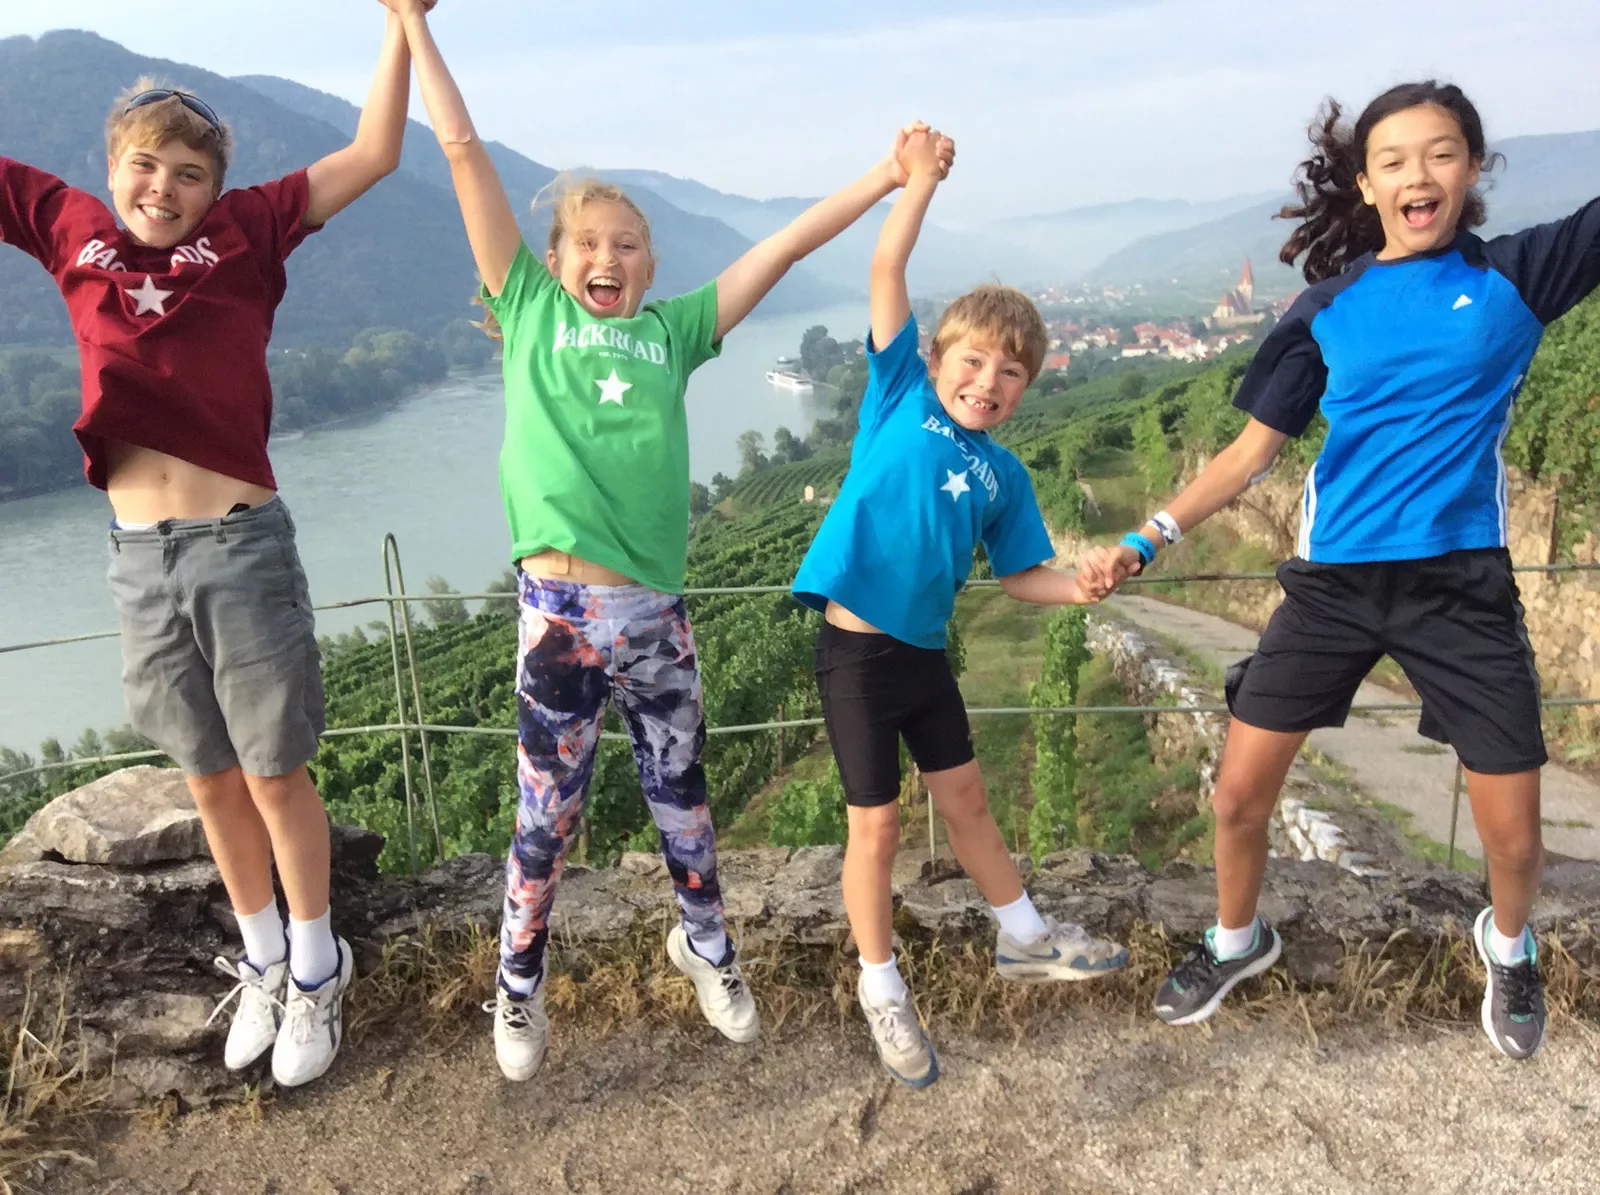 Kids jumping on a mountain